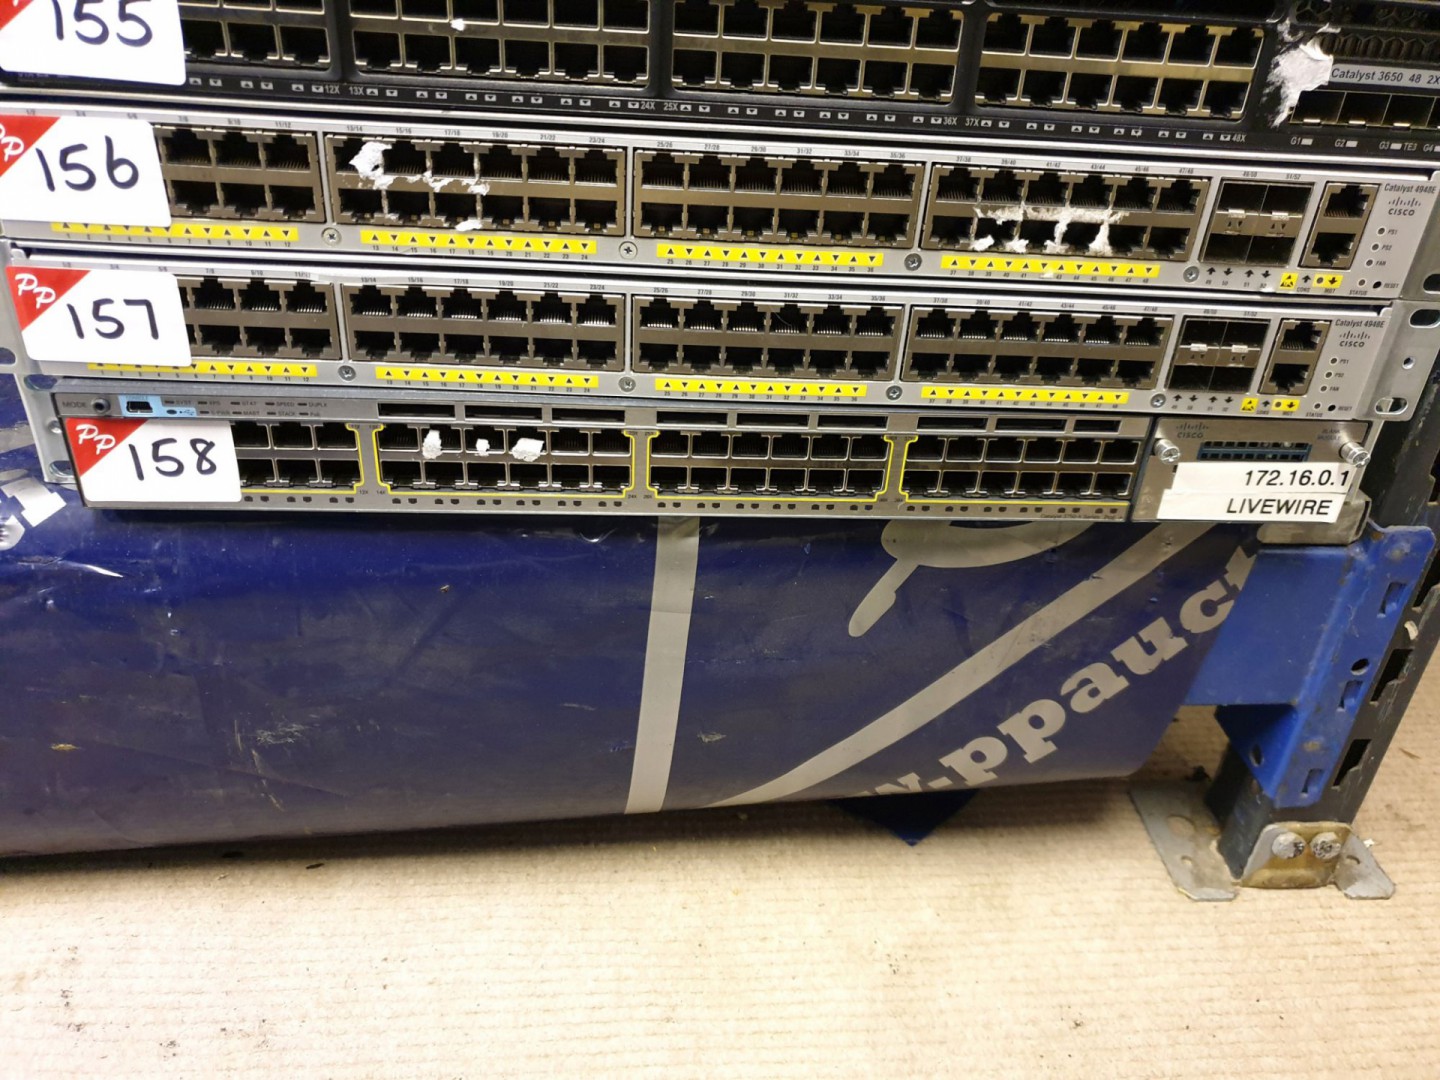 Cisco Systems Catalyst 3750-X network switch